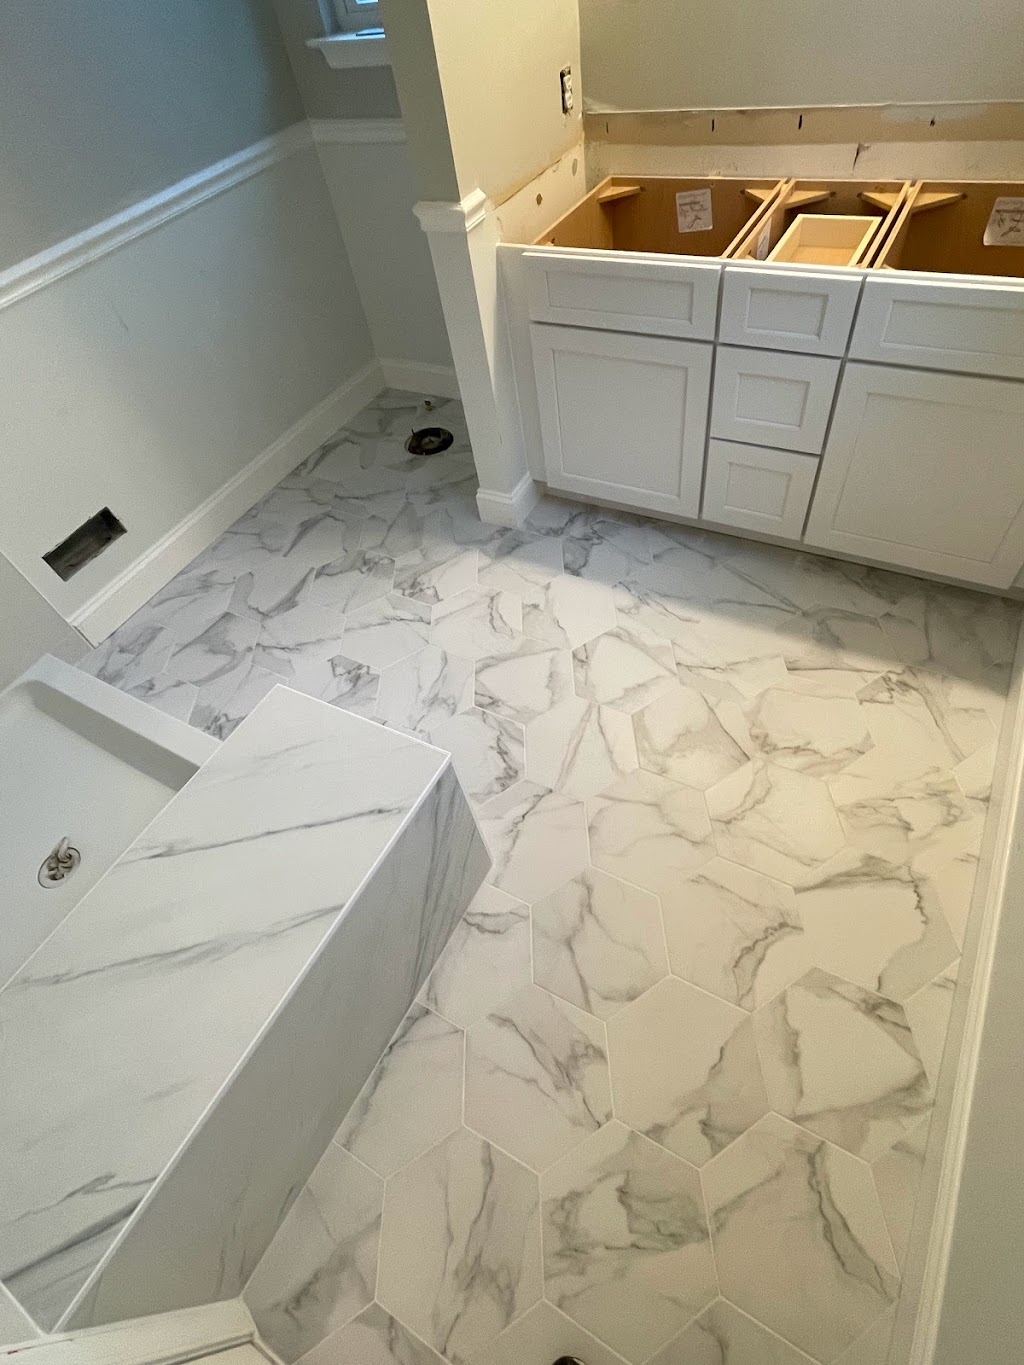 YOUR TILE GUYS.inc | 3 Crest Ave, Malvern, PA 19355 | Phone: (610) 710-6977